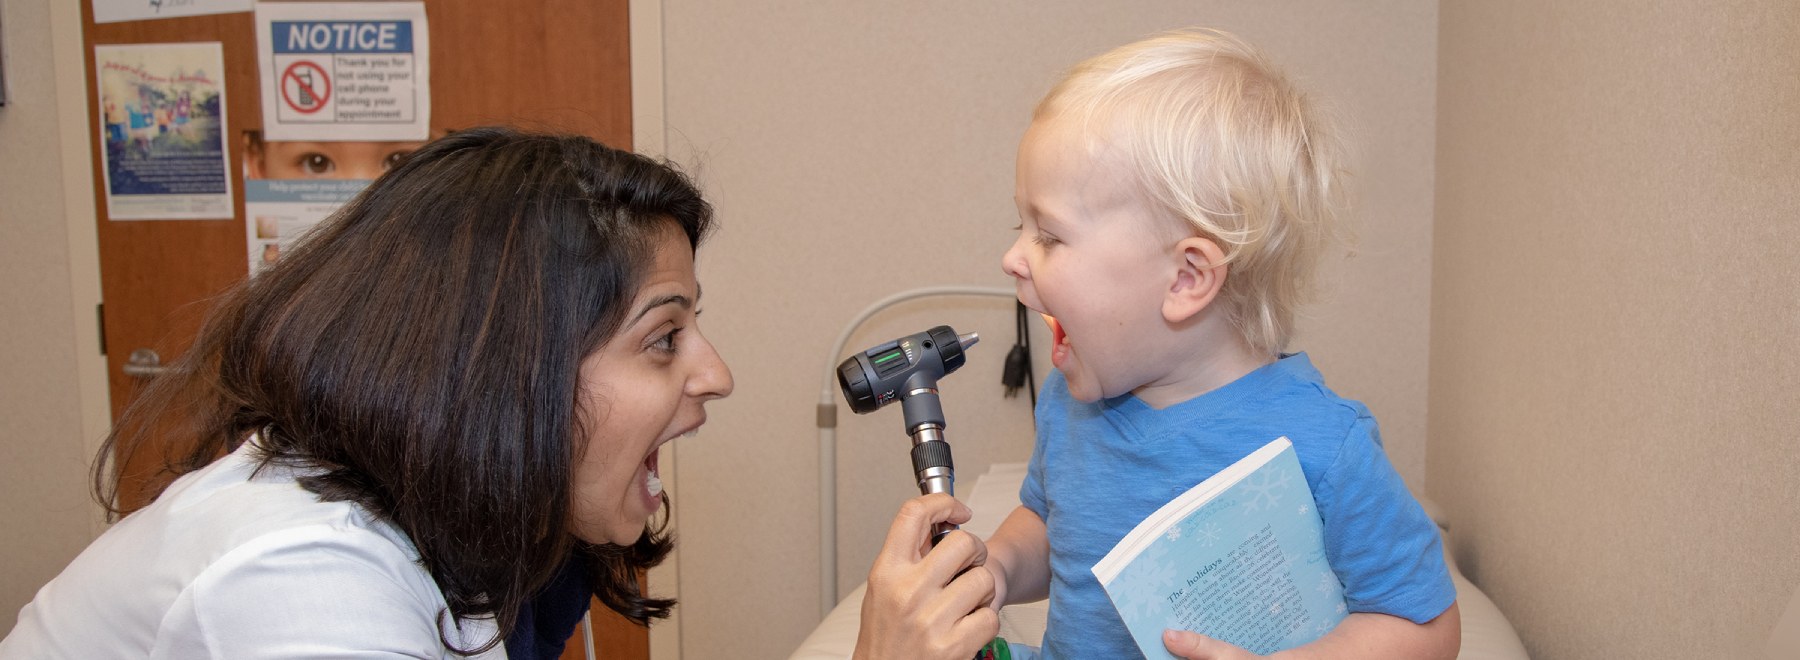 A Med/Peds provider examine a young child.